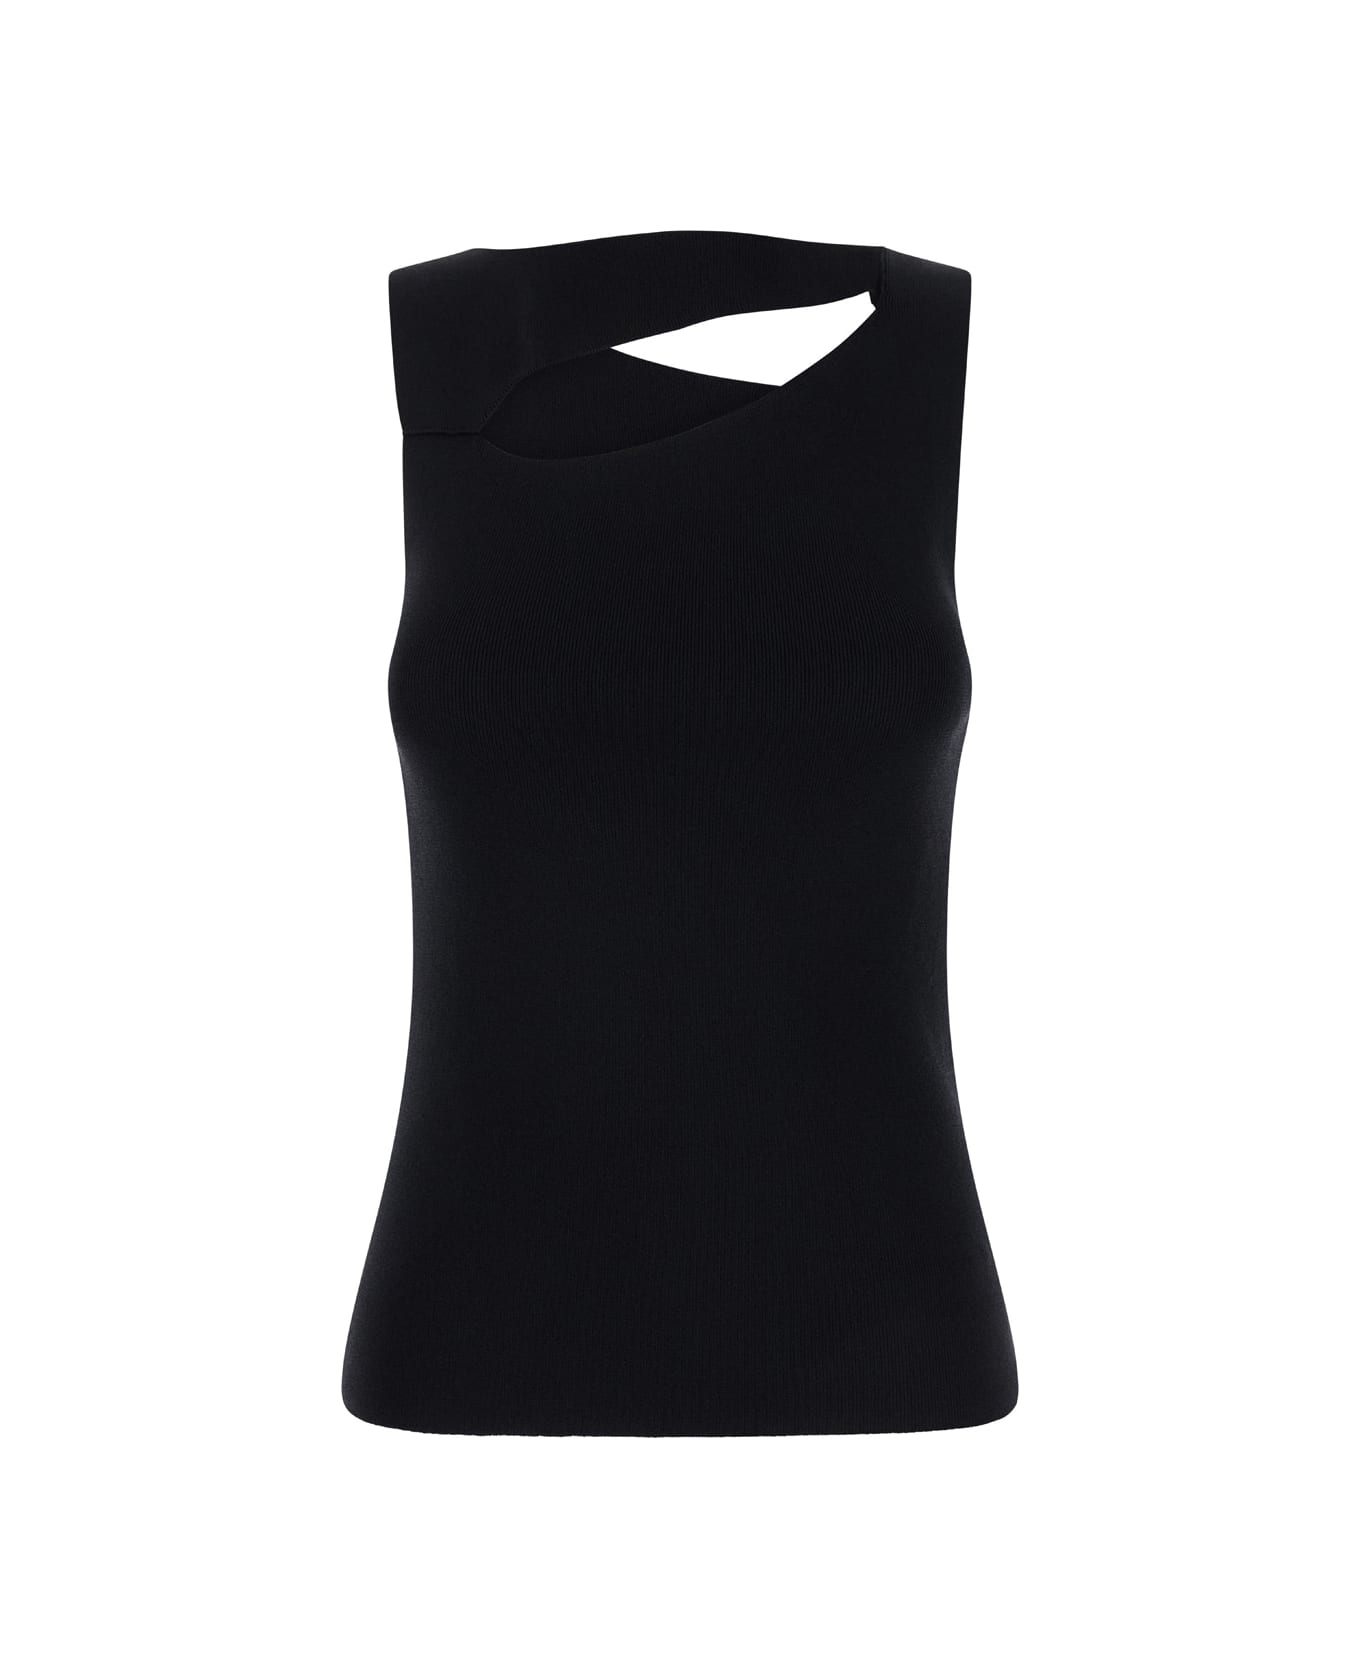 SEMICOUTURE Black Sleeveless Top With Cut-out At The Front And Back In Viscose Blend Woman - Black タンクトップ